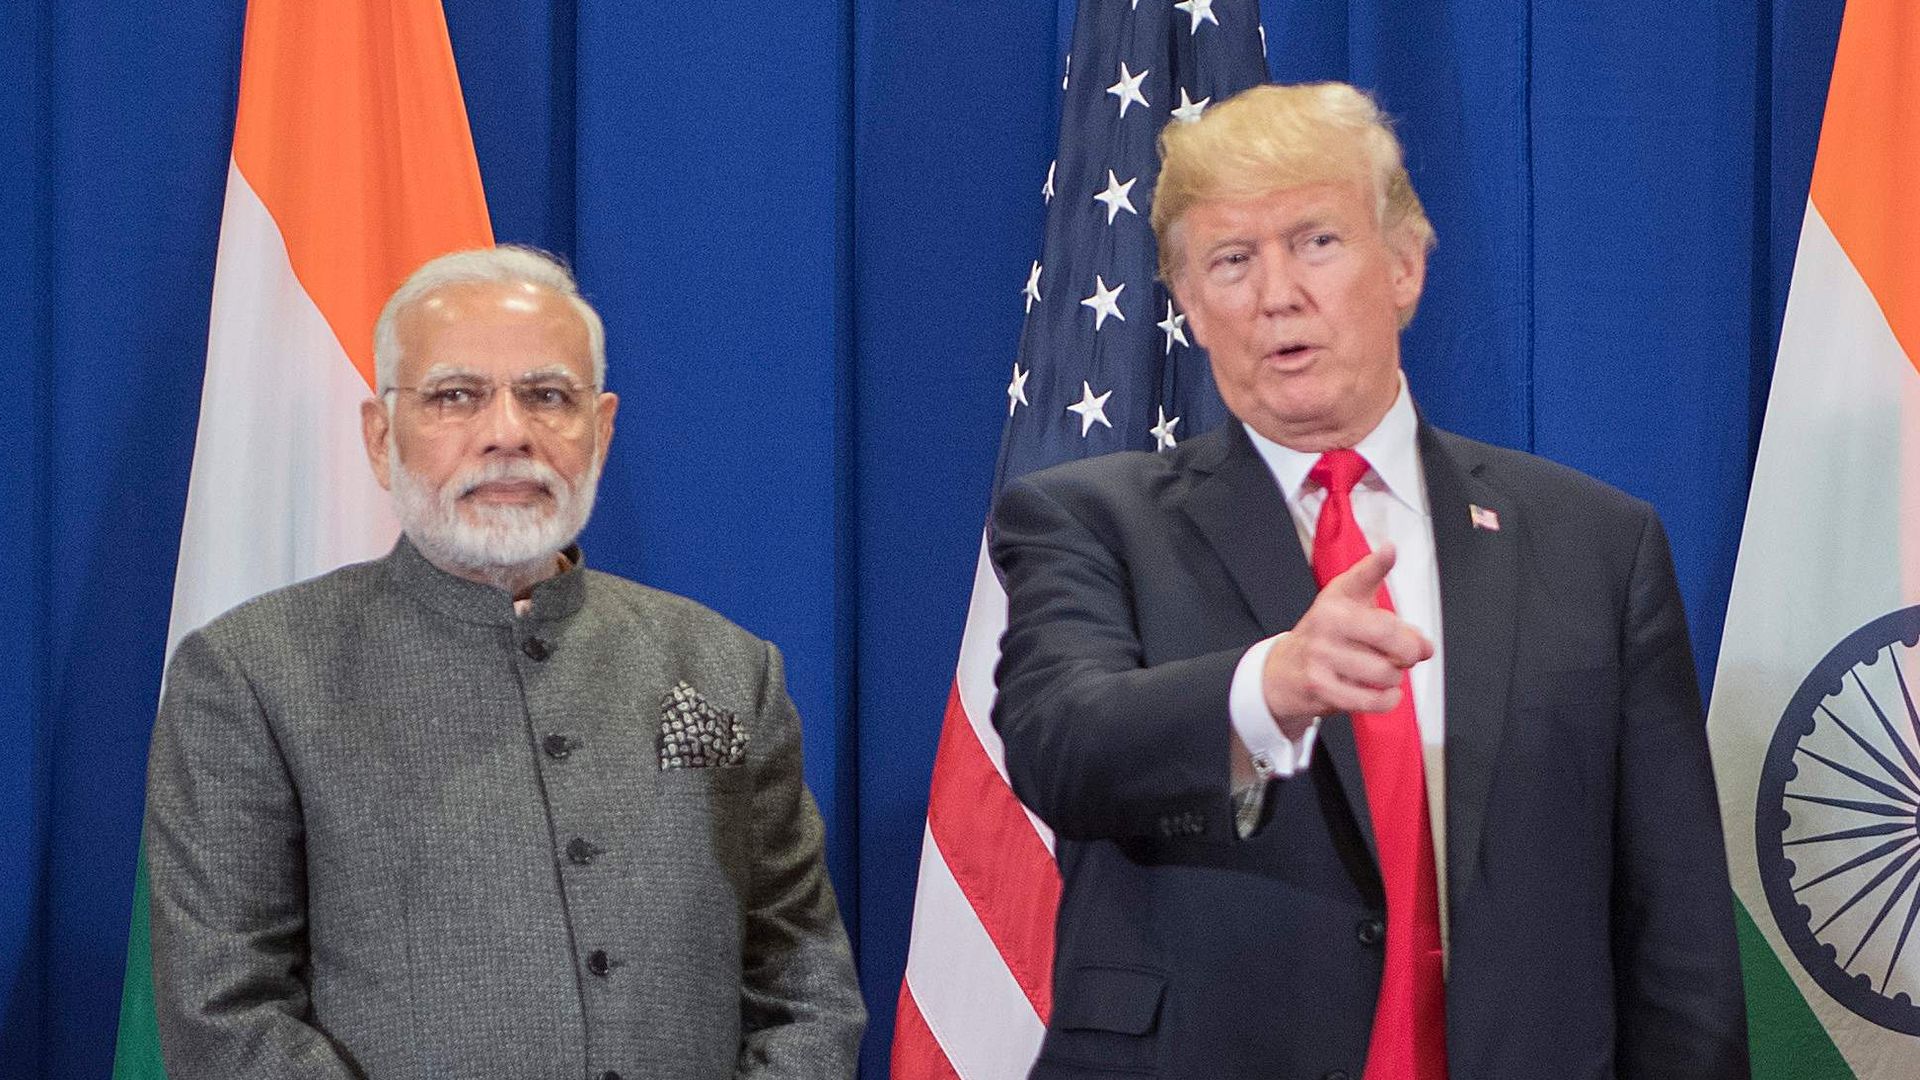  US President Donald Trump (C) speaks with Indian Prime Minister Narendra Modi on the sideline of the 31st Association of Southeast Asian Nations (ASEAN) Summit in Manila on November 13, 2017. 